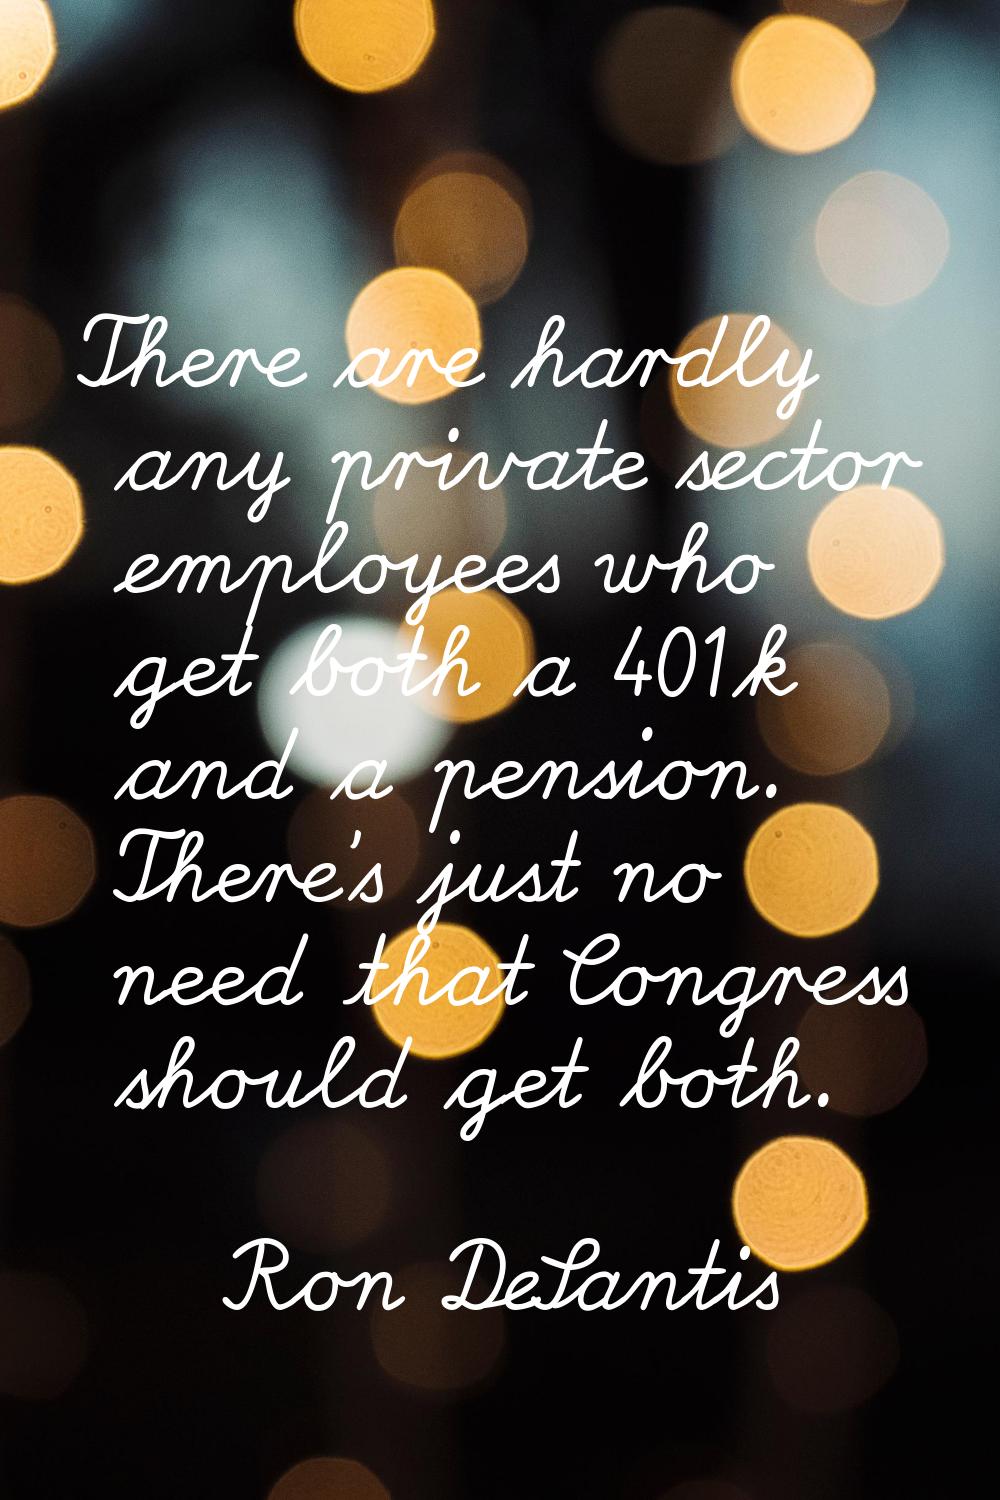 There are hardly any private sector employees who get both a 401k and a pension. There's just no ne